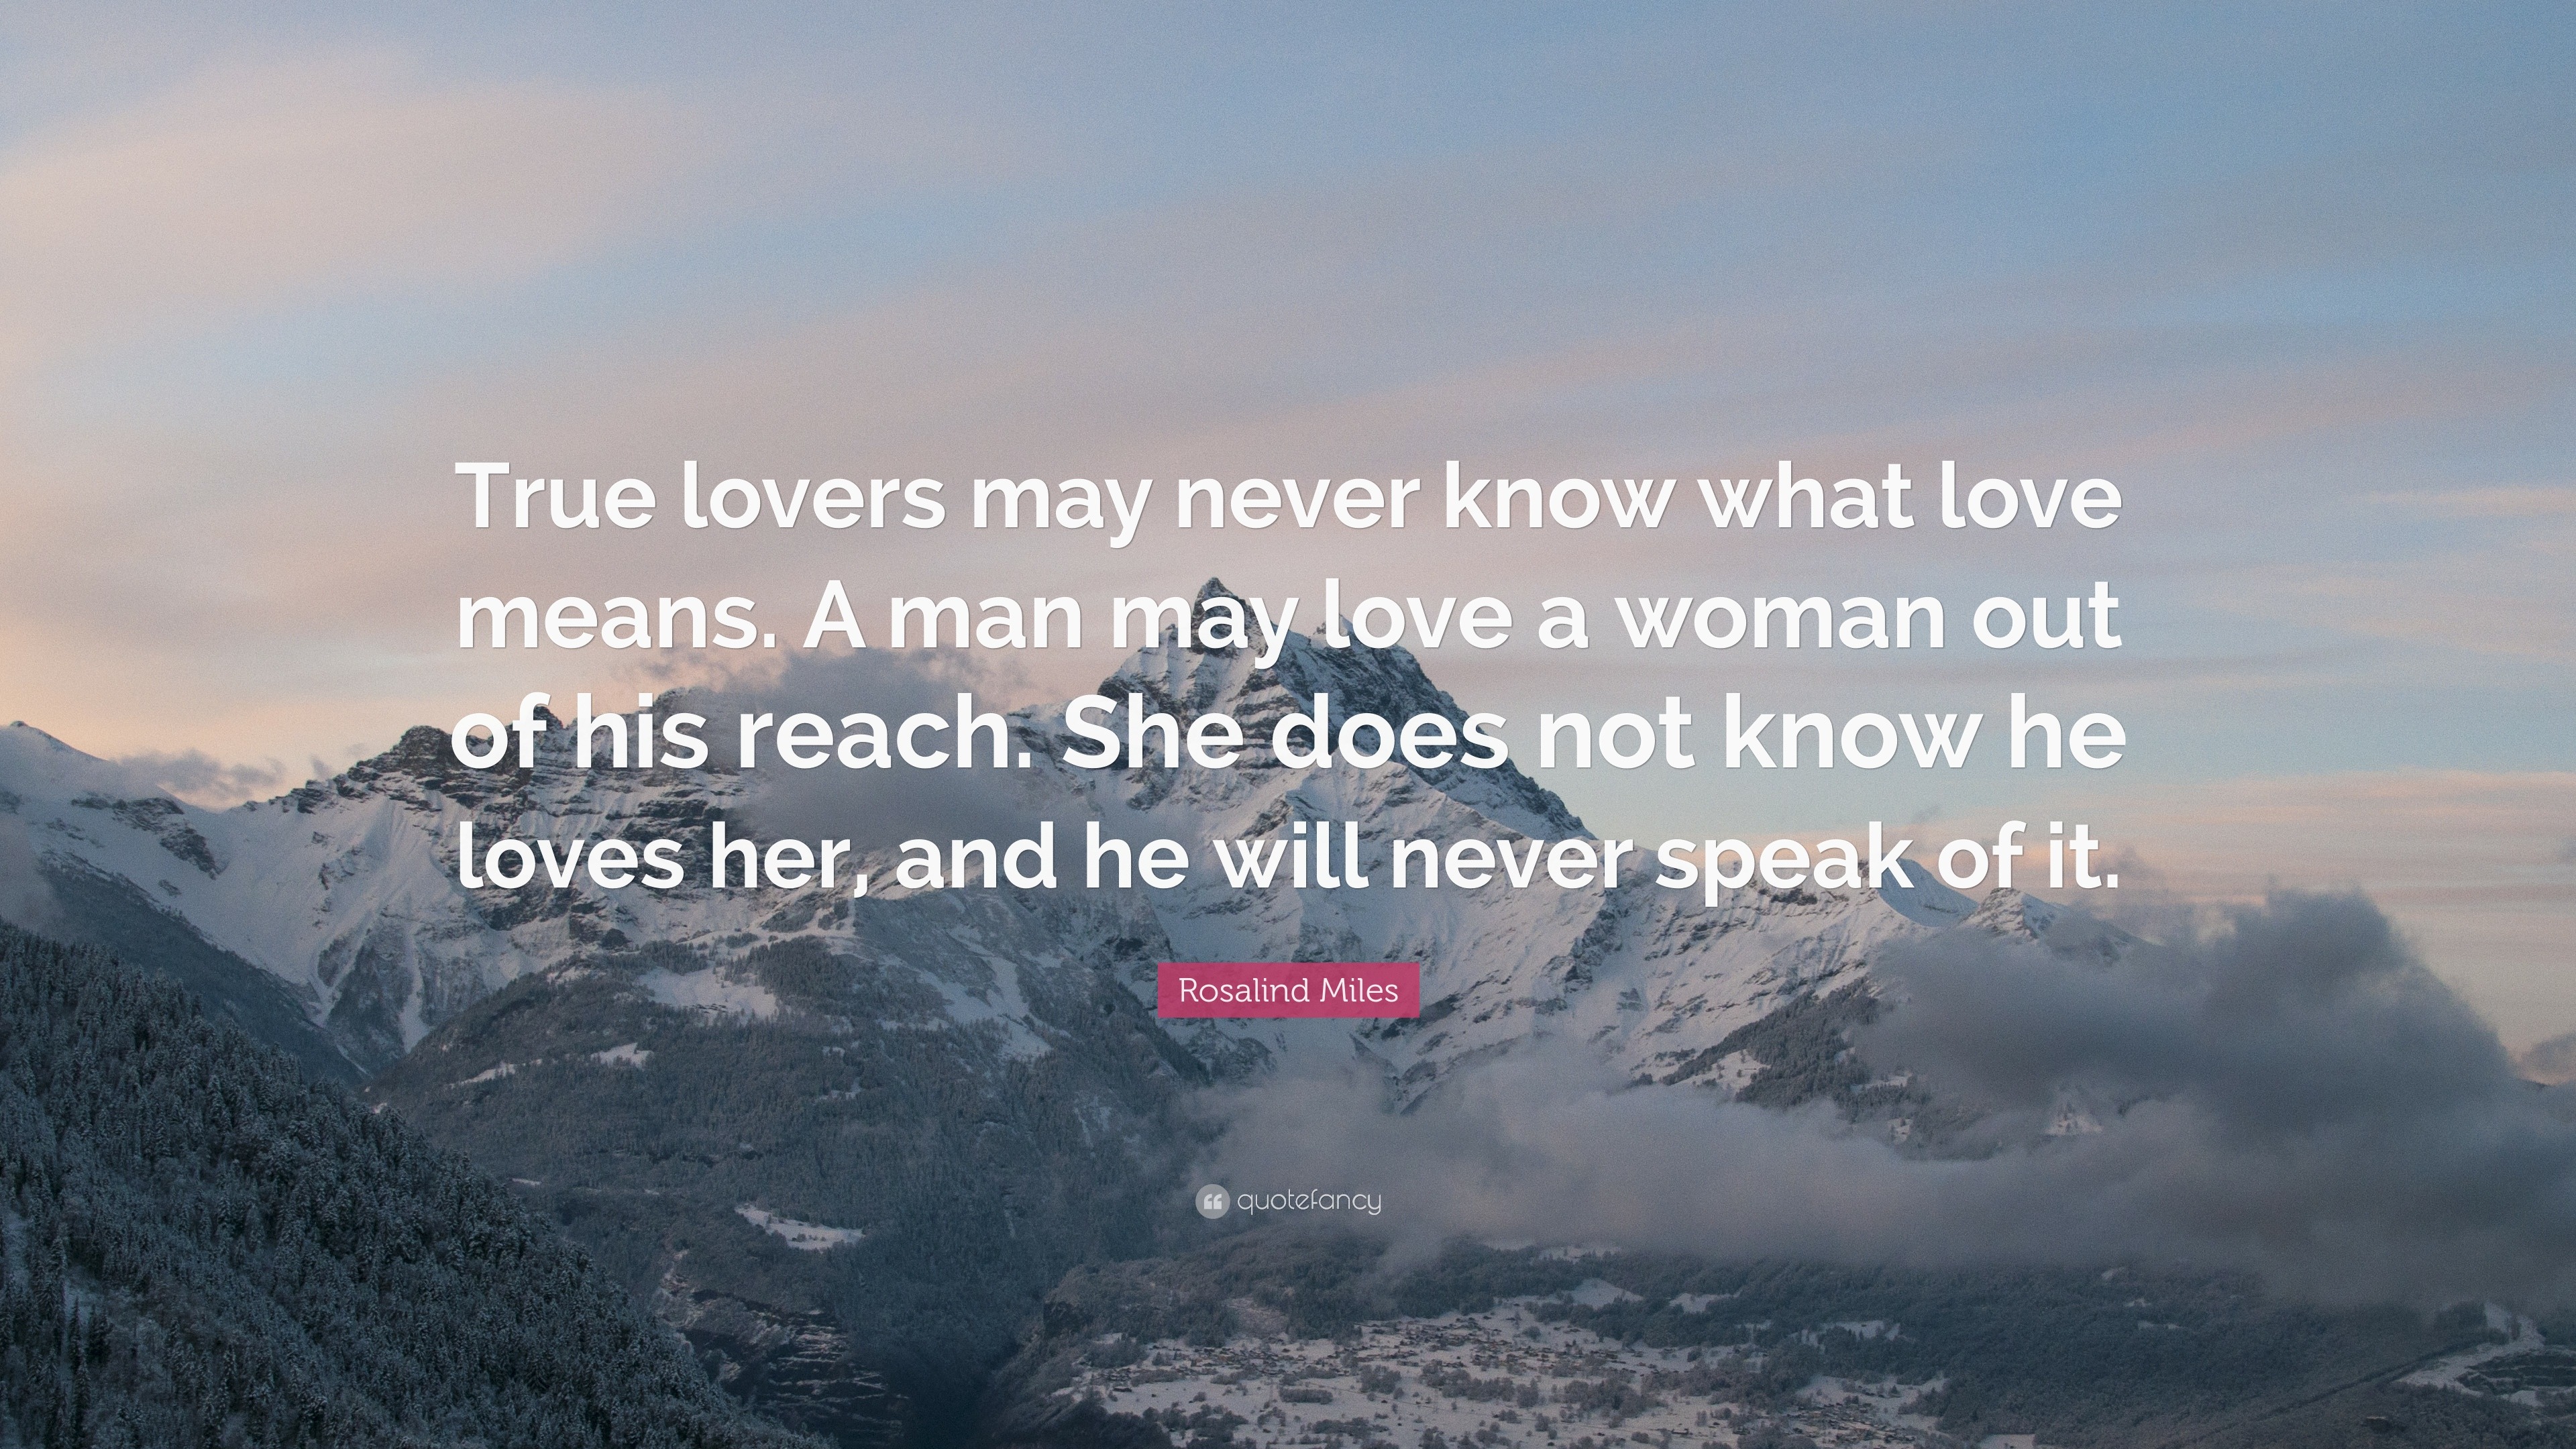 Rosalind Miles Quote “True lovers may never know what love means A man